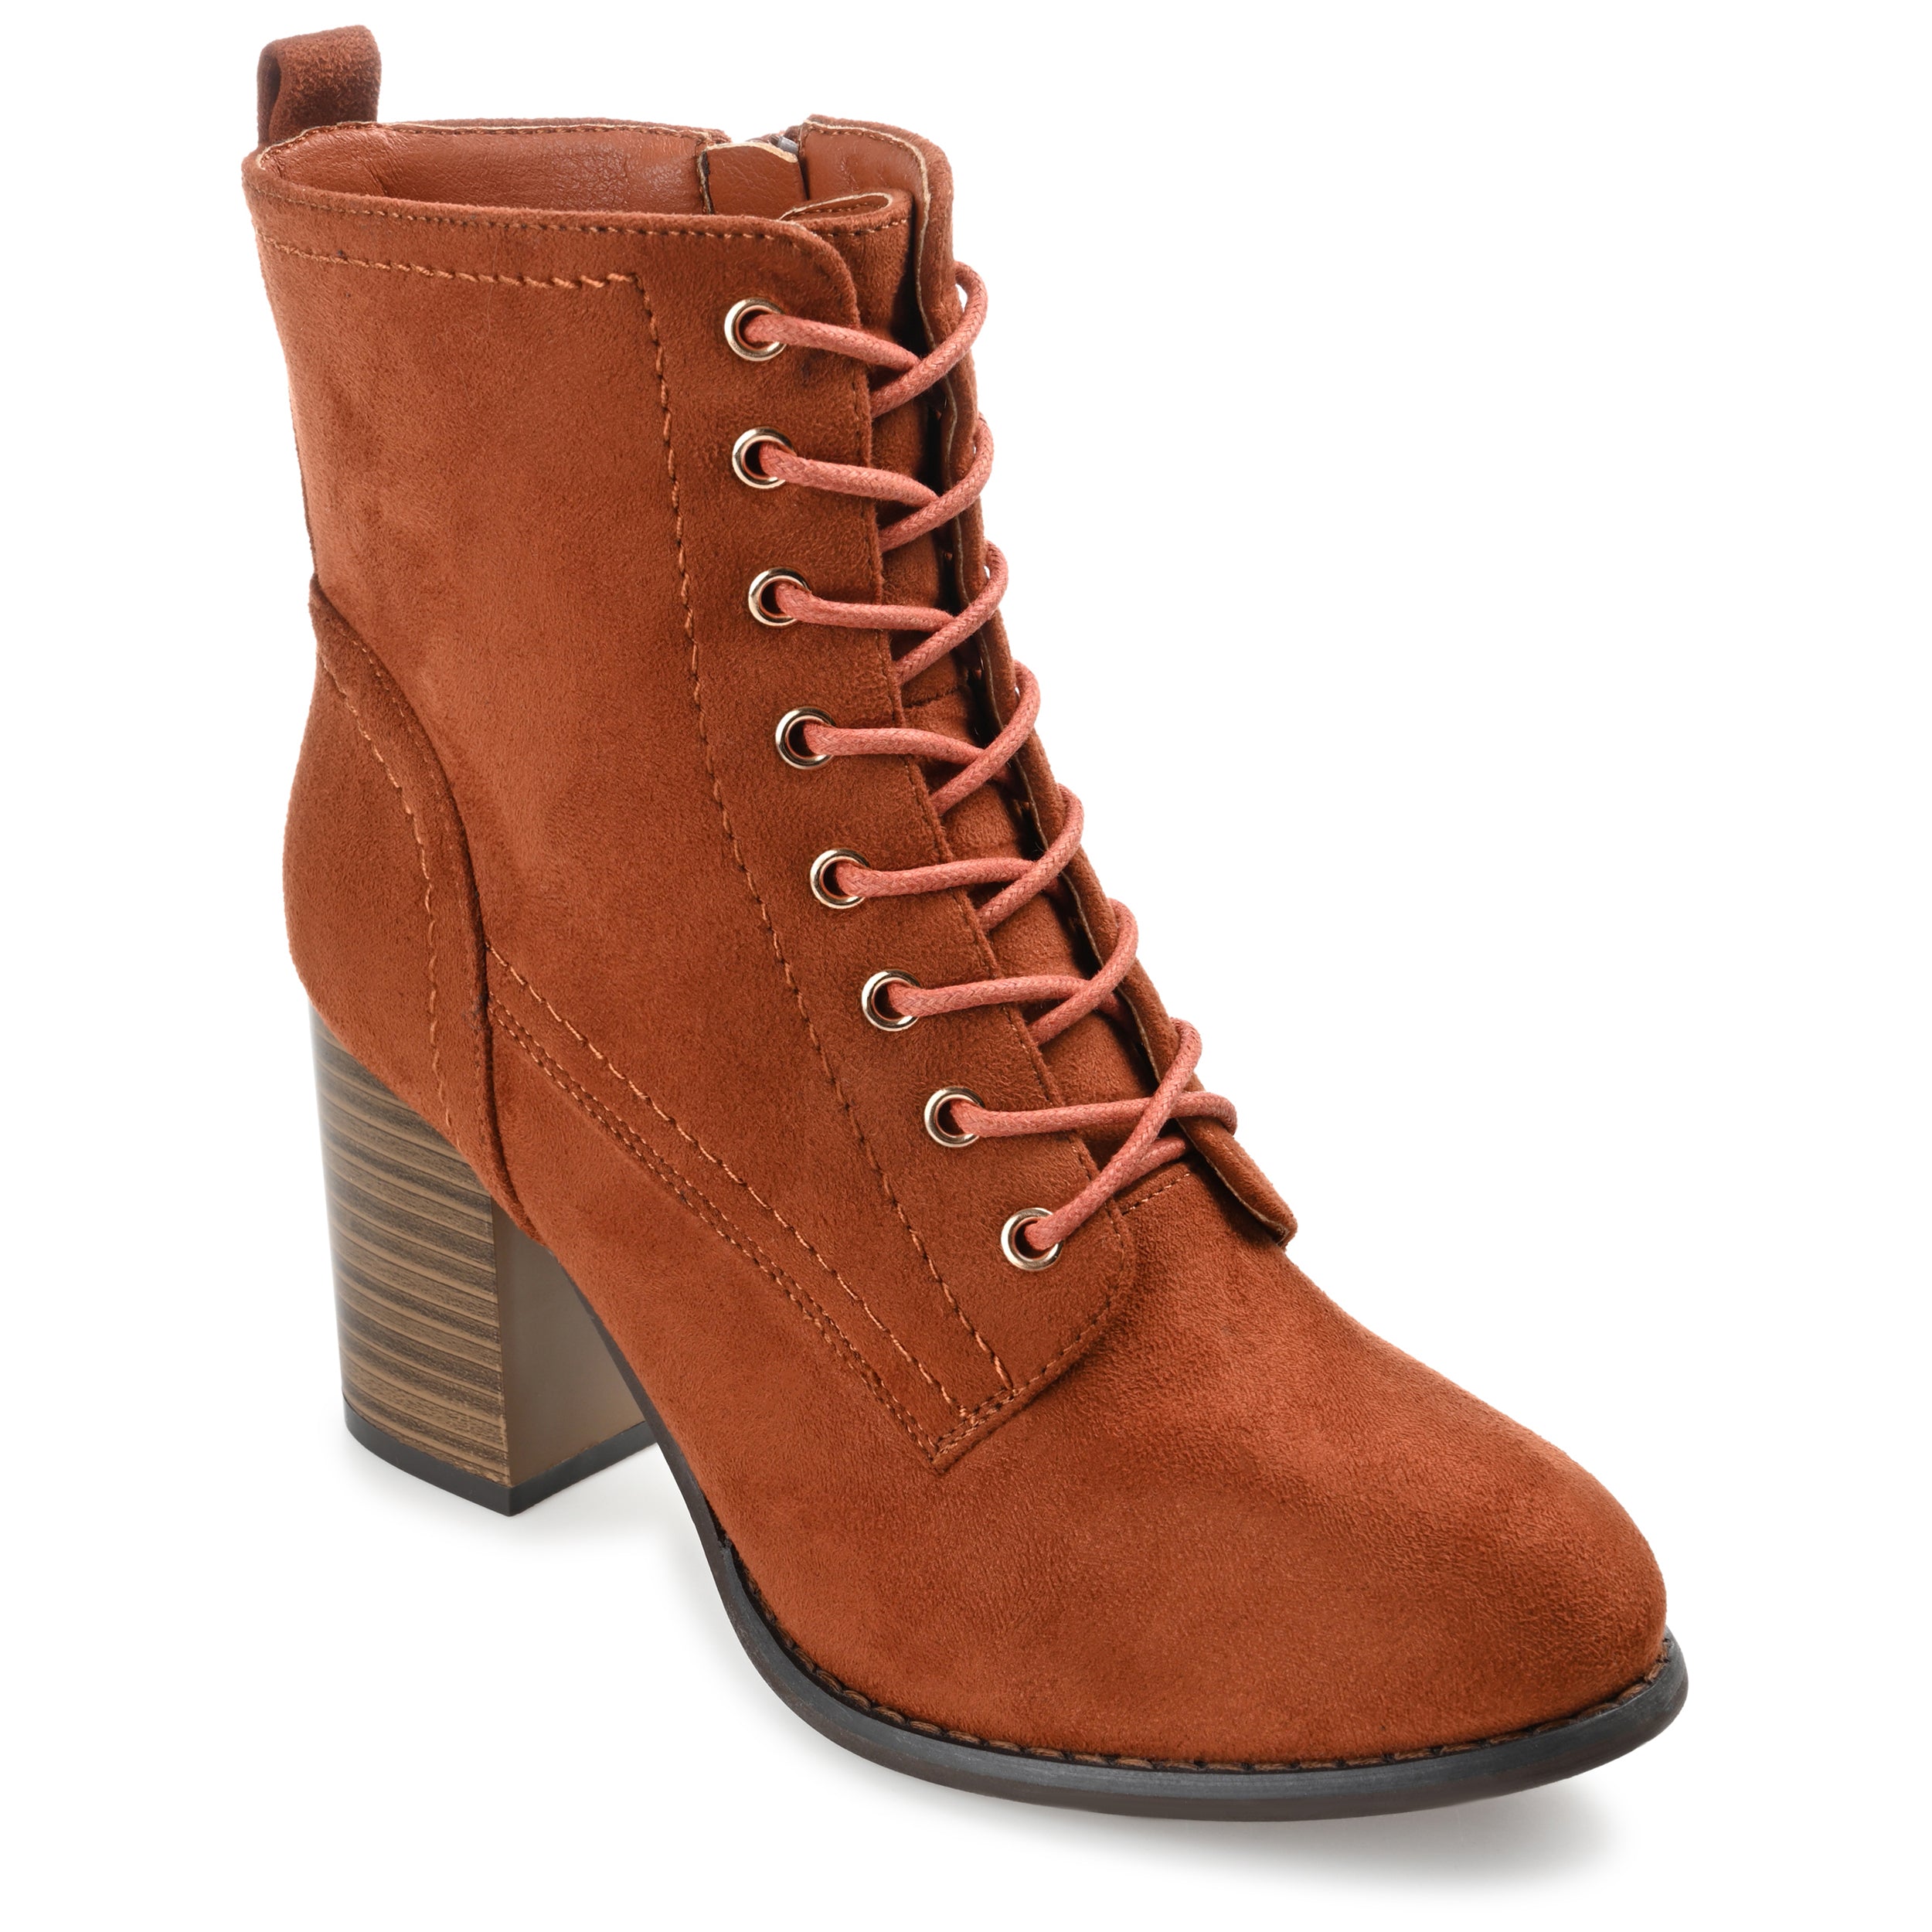 Women's Ankle Boots, The Daisy - Bone